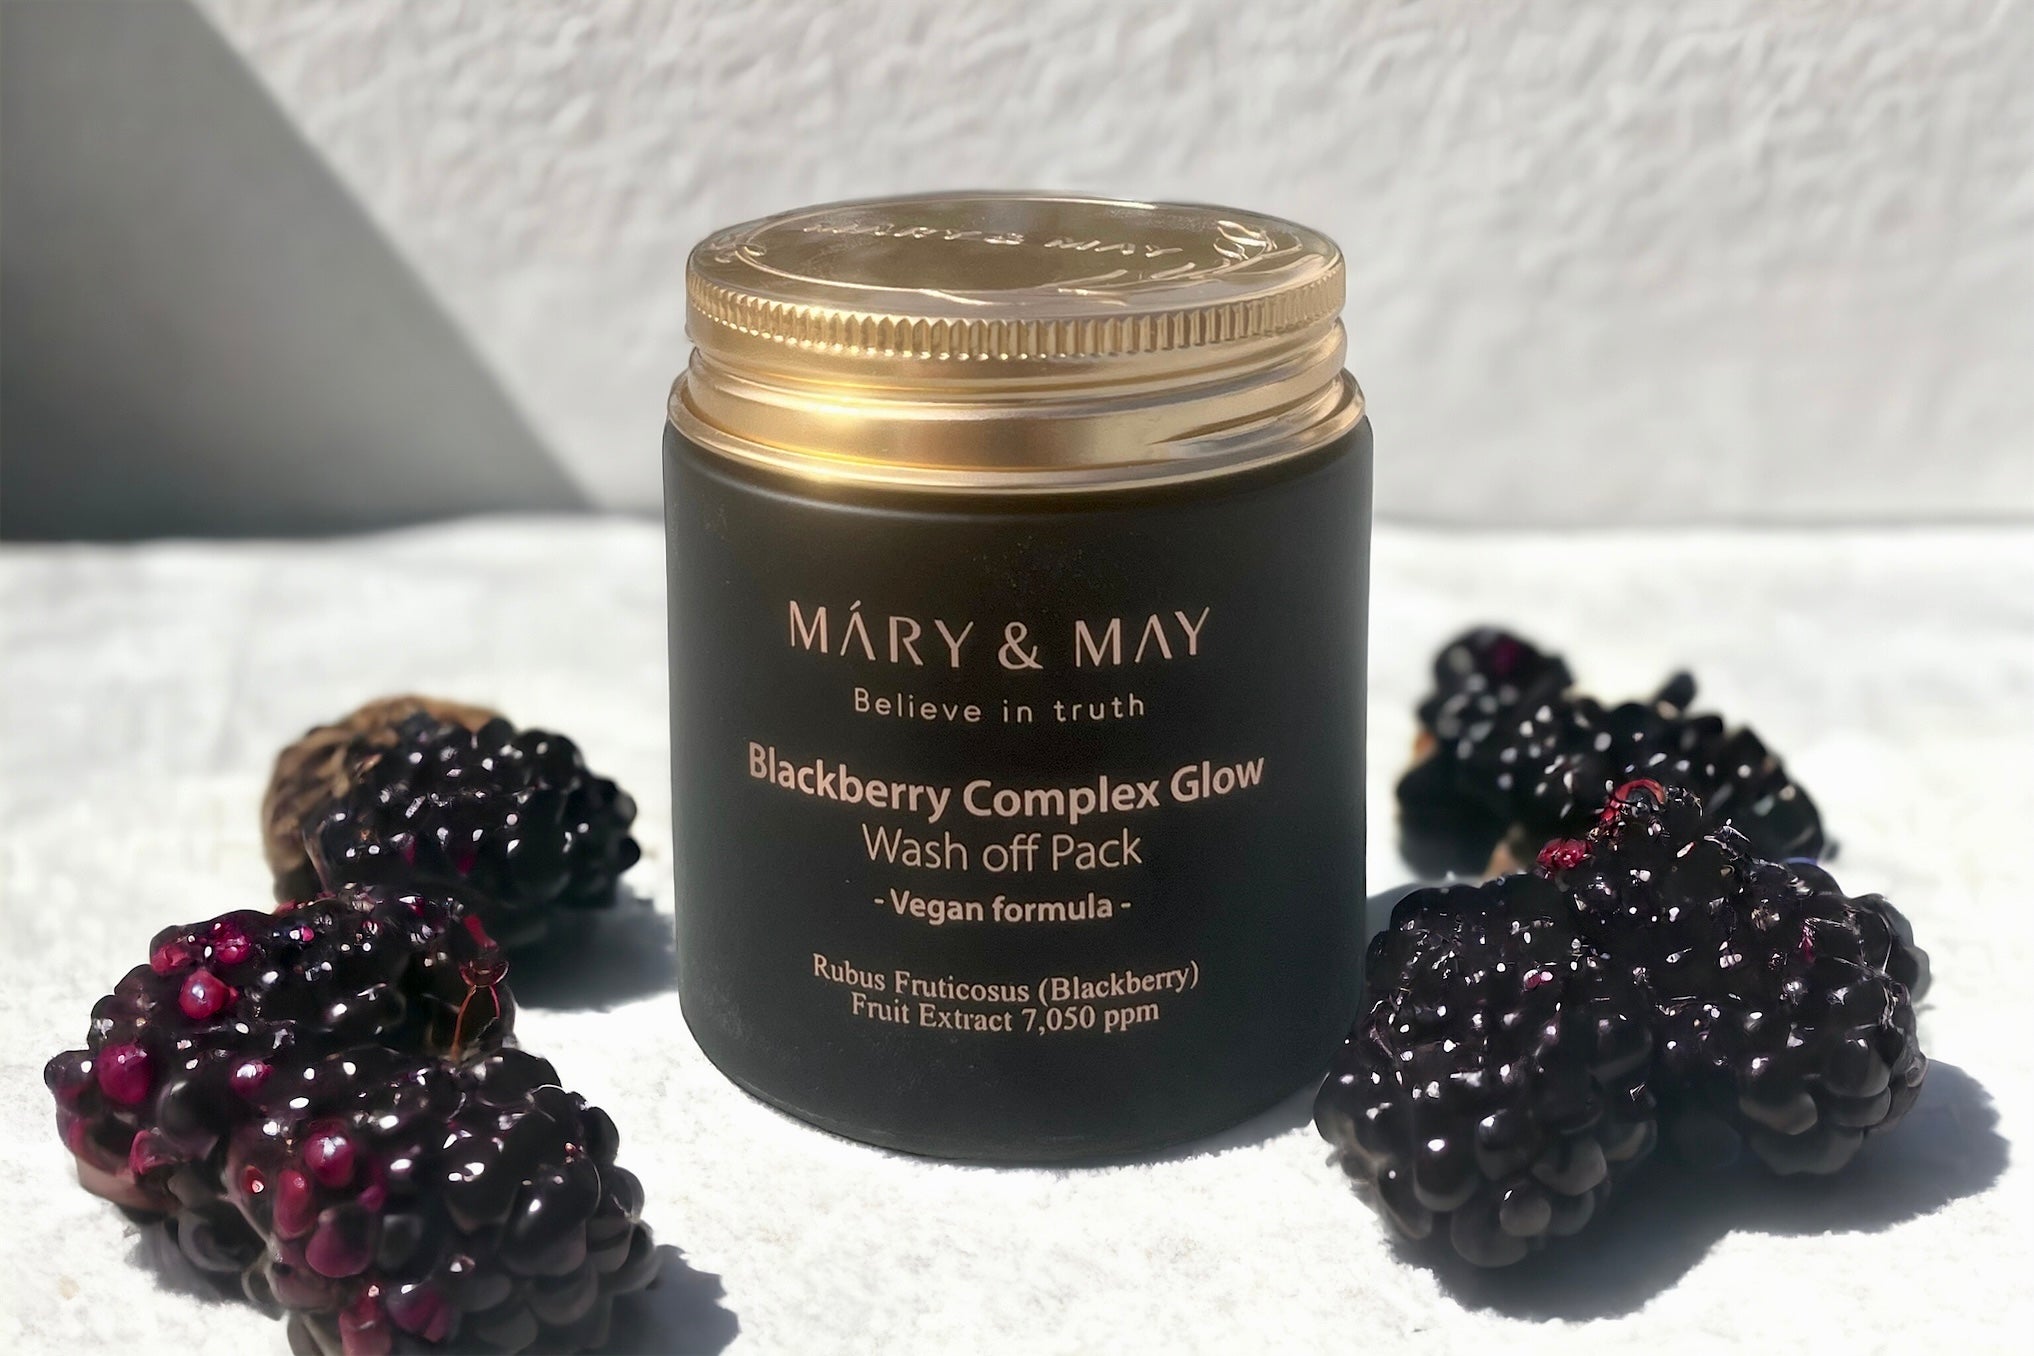 HI-REVIEW: Mary&May Blackberry Complex Glow Wash Off Pack